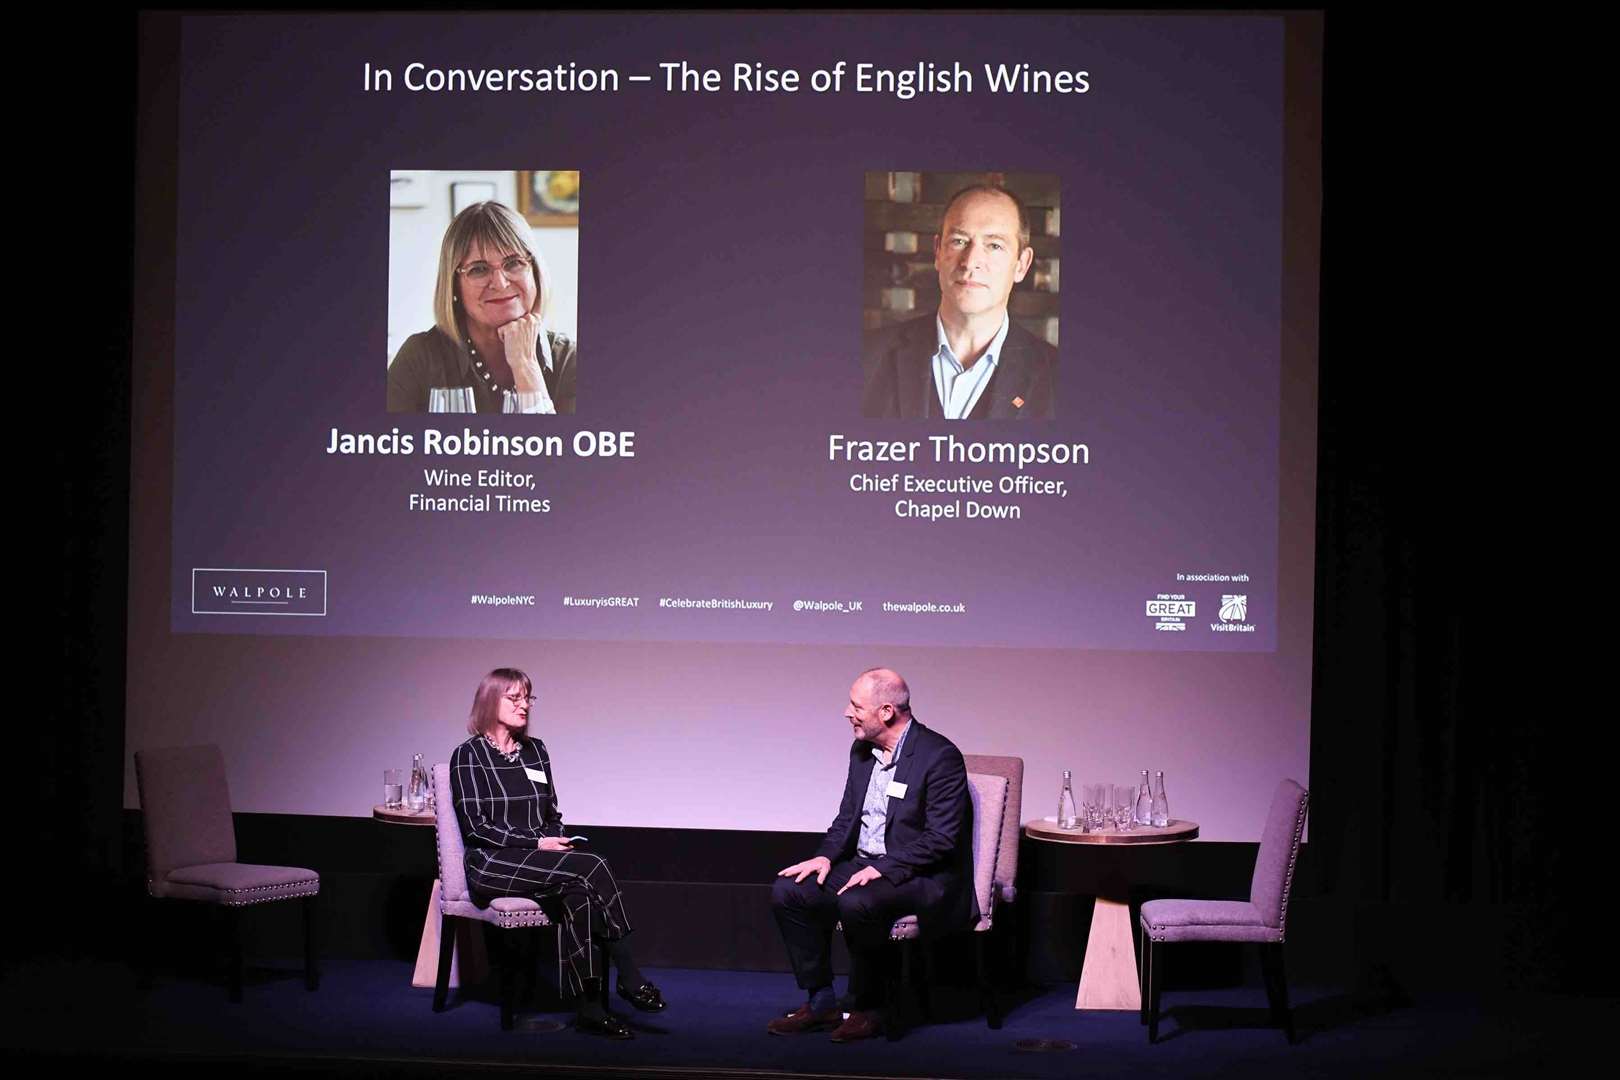 Jancis Robinson and Frazer Thompson on stage in New York